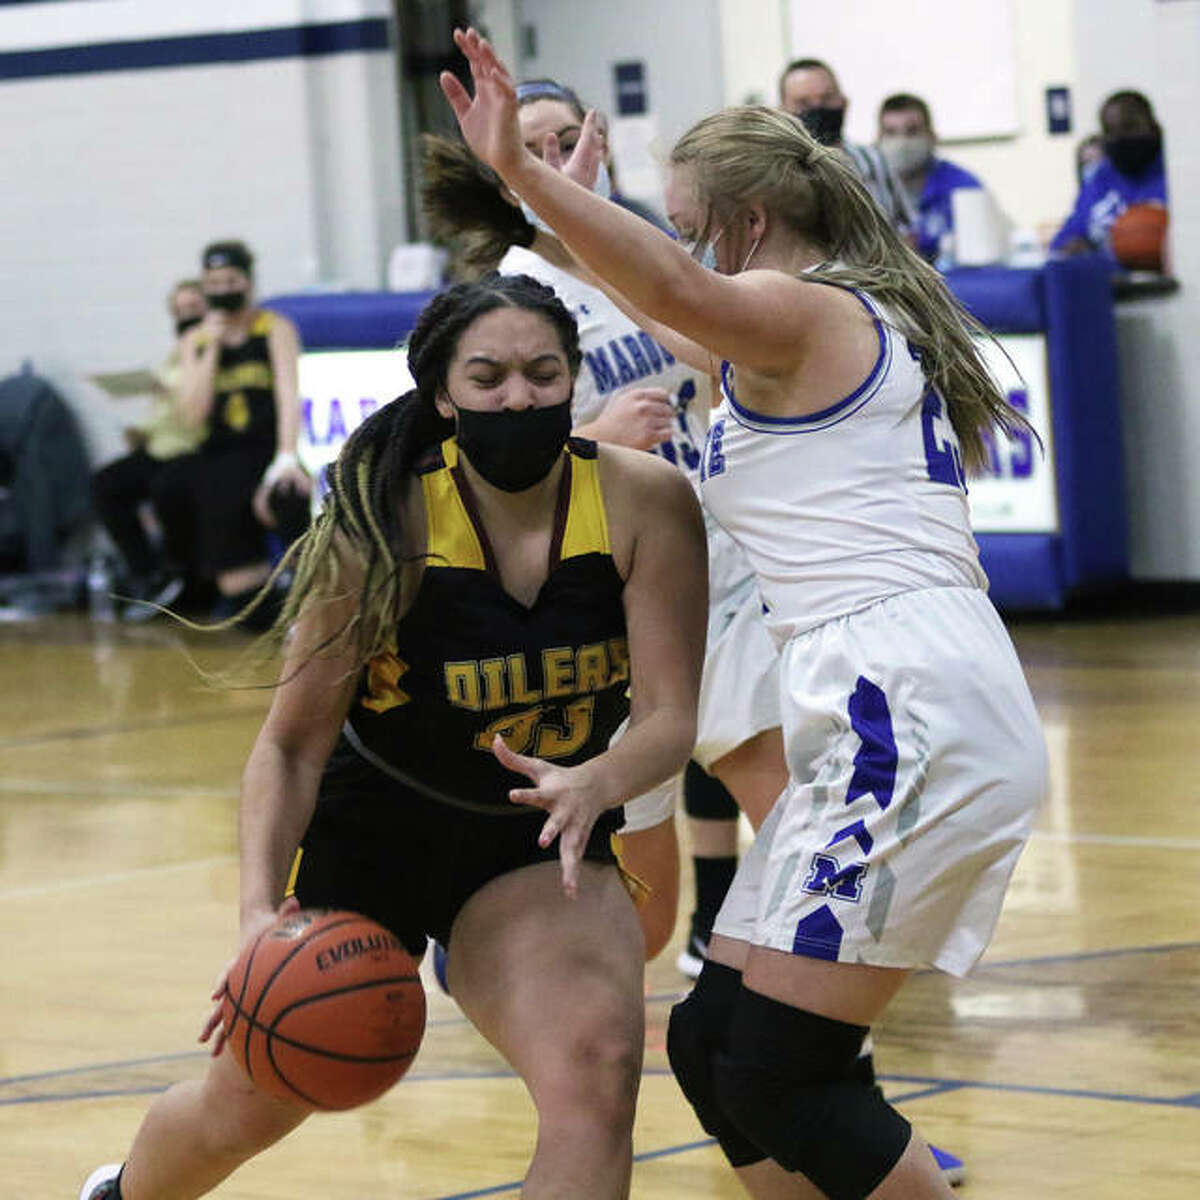 EA-WR’s Emily Johnson (left) drives on a Marquette Catholic defender in a game earlier this season. Johnson, a freshman, had 14 points and 10 rebounds in the Oilers win Monday in Wood River.